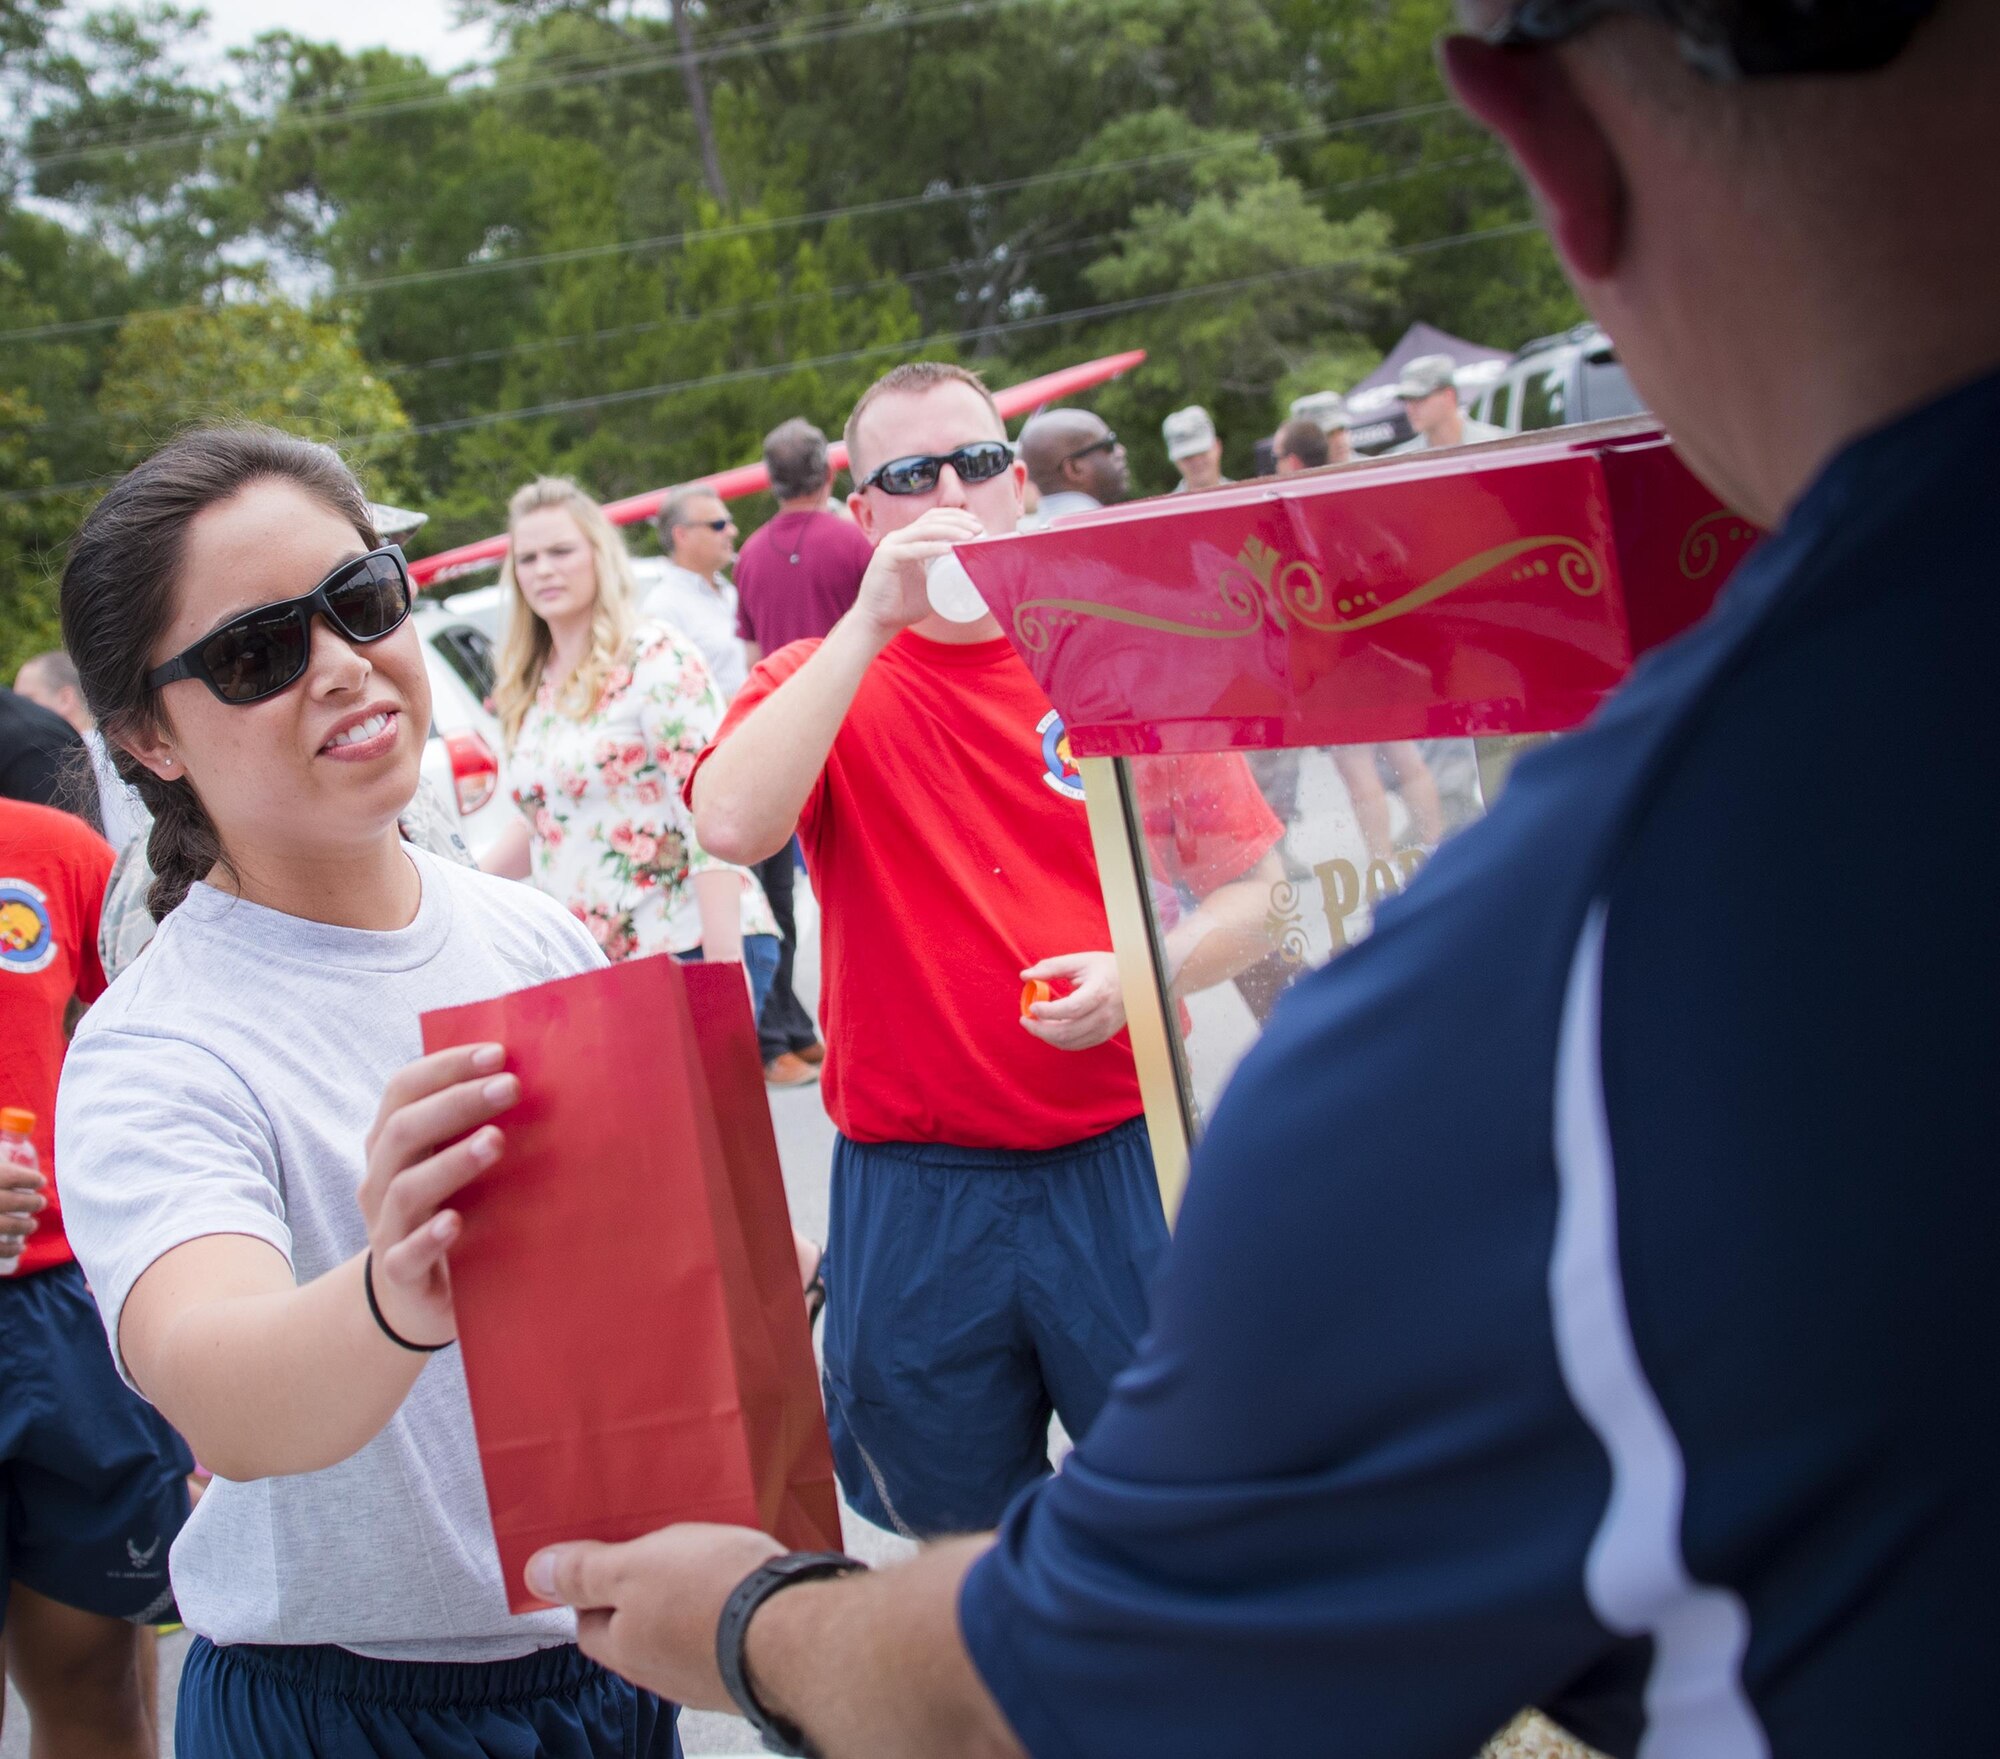 An Airman receives a bag of popcorn from a vendor during the Eglin Connects event at Eglin Air Force Base, Fla., June 2.  The event to help promote resiliency featured information booths, sporting events and a car show.  (U.S. Air Force photo/Samuel King Jr.)